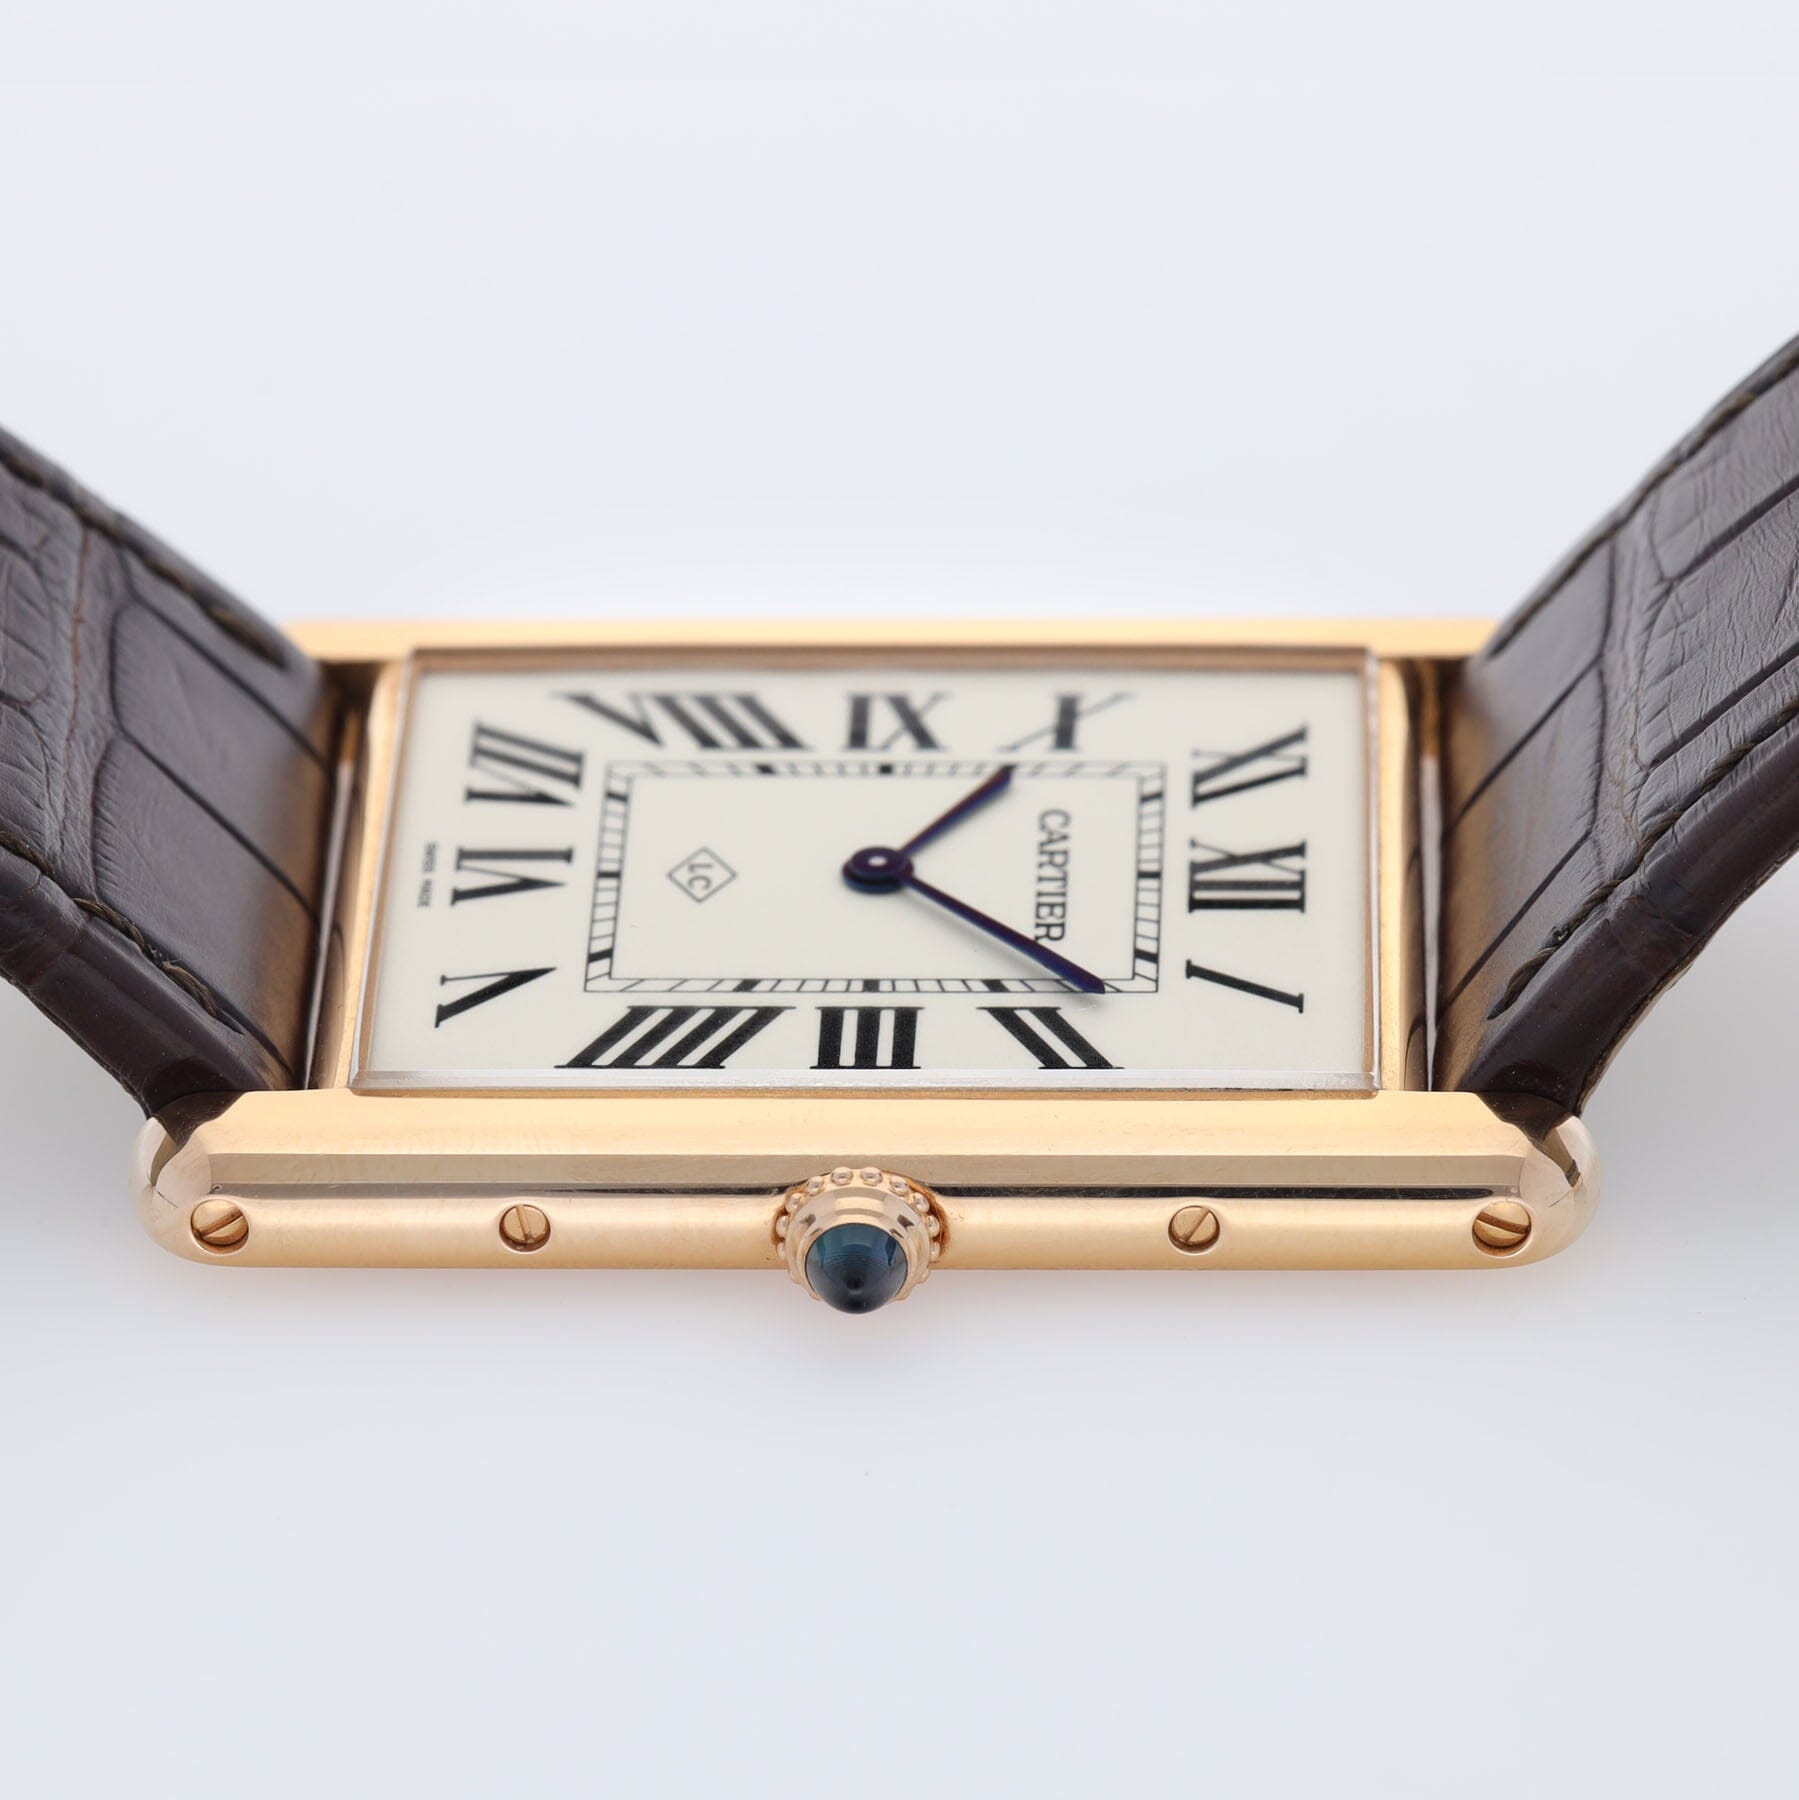 Cartier Tank Louis XL 3280 Collaborateur Edition 18kt Rose Gold Box and Papers